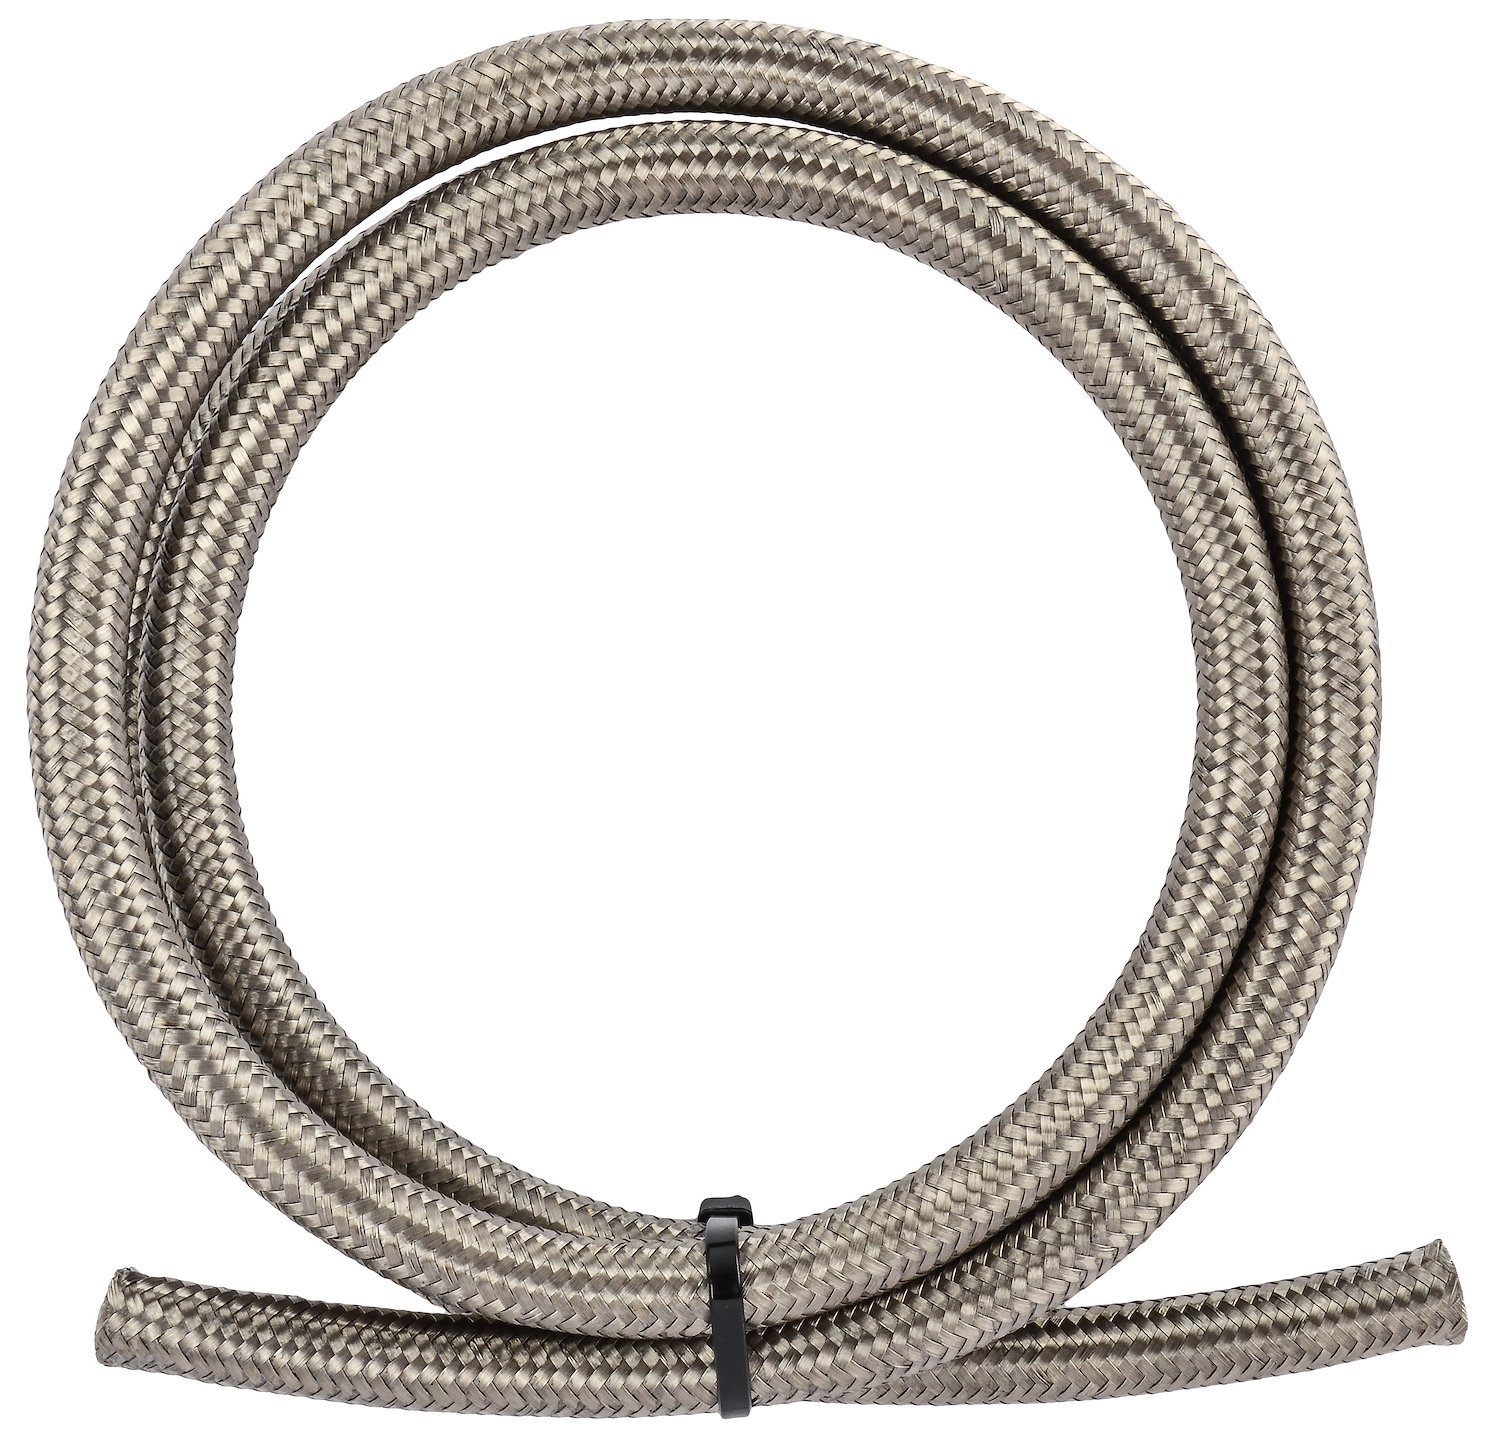 Pro-Flo 200 Series Stainless Steel Braided Hose -10 AN [20 ft.]